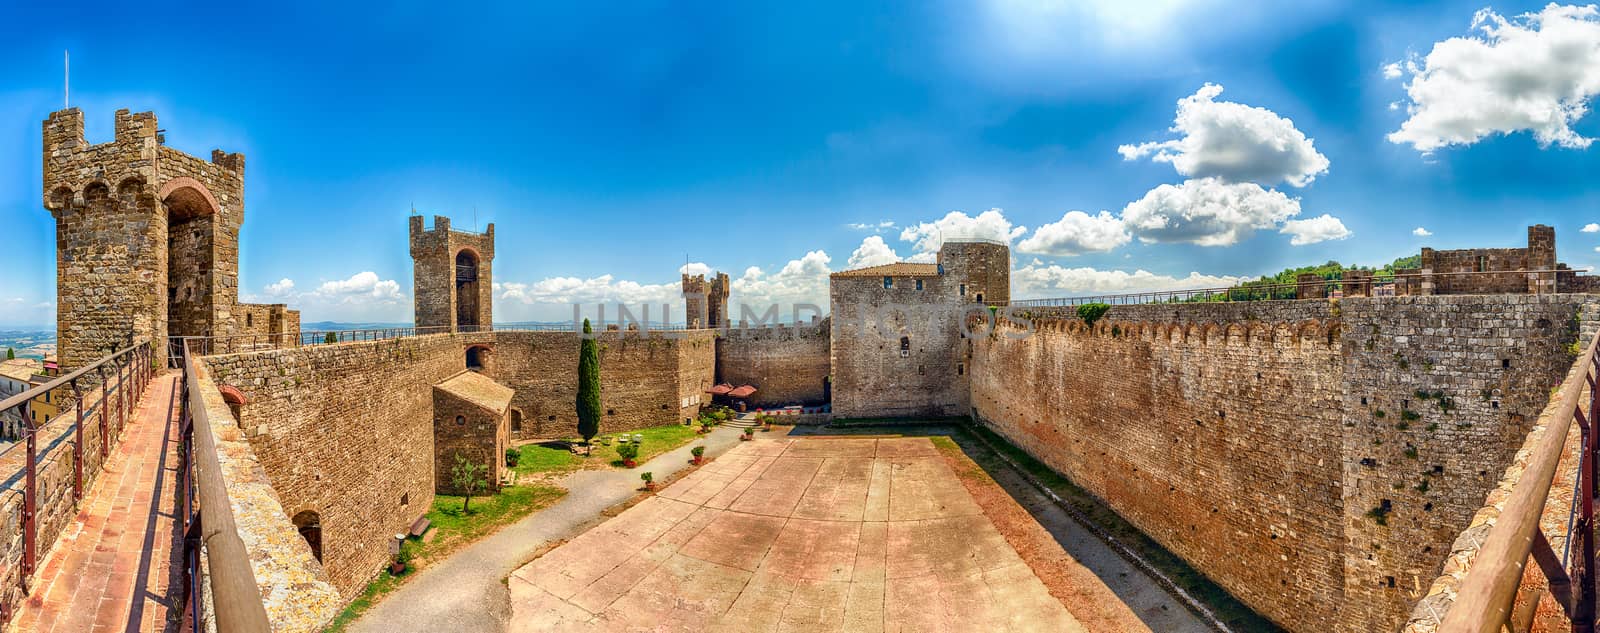 Interior panoramic view of a medieval italian fortress, iconic landmark and one of the most visited sightseeing in Montalcino, Tuscany, Italy